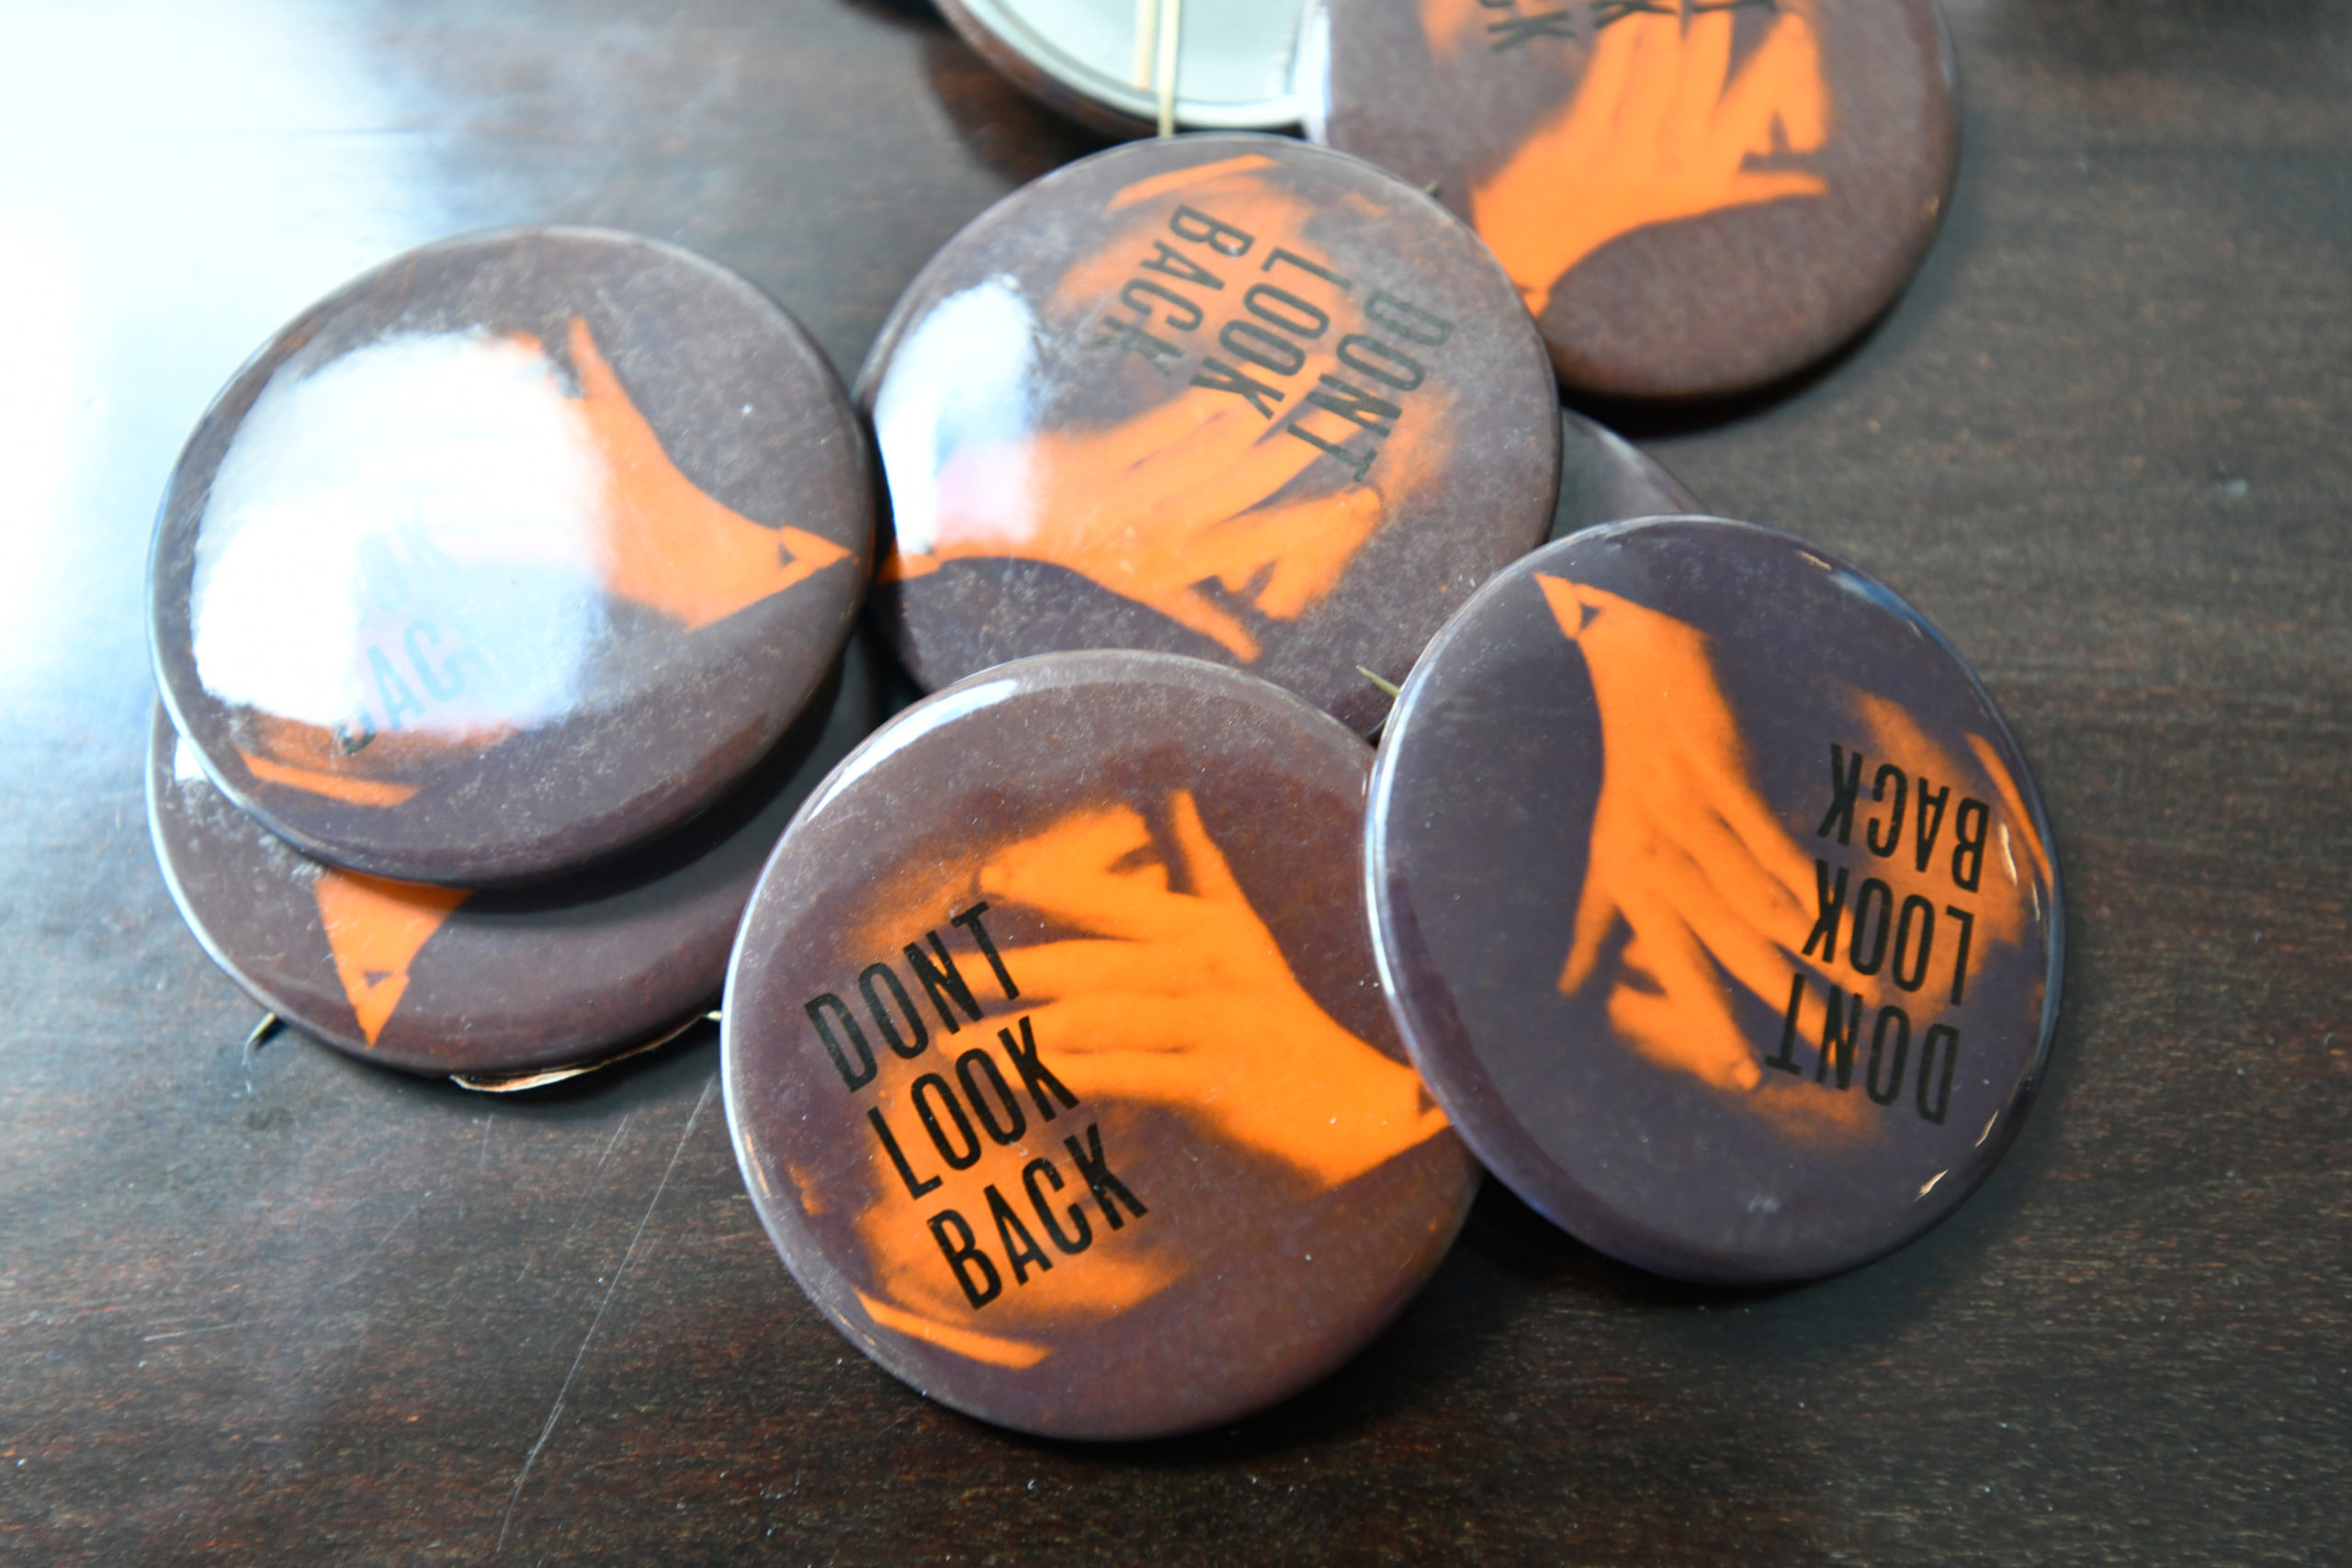 Promotional buttons from 